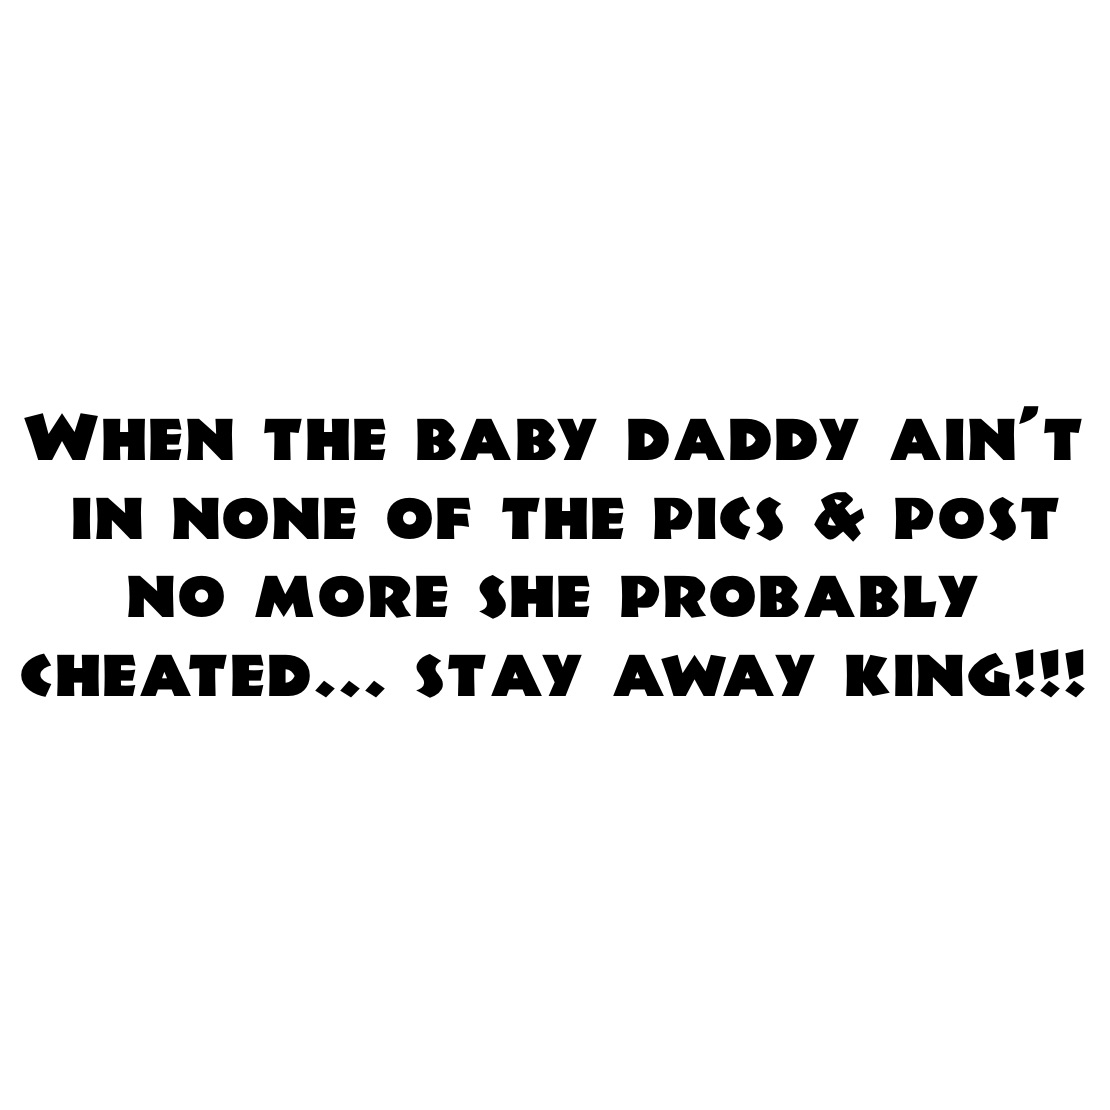 When the baby daddy ain’t
 in none of the pics & post 
no more she probably cheated... stay away king!!! 